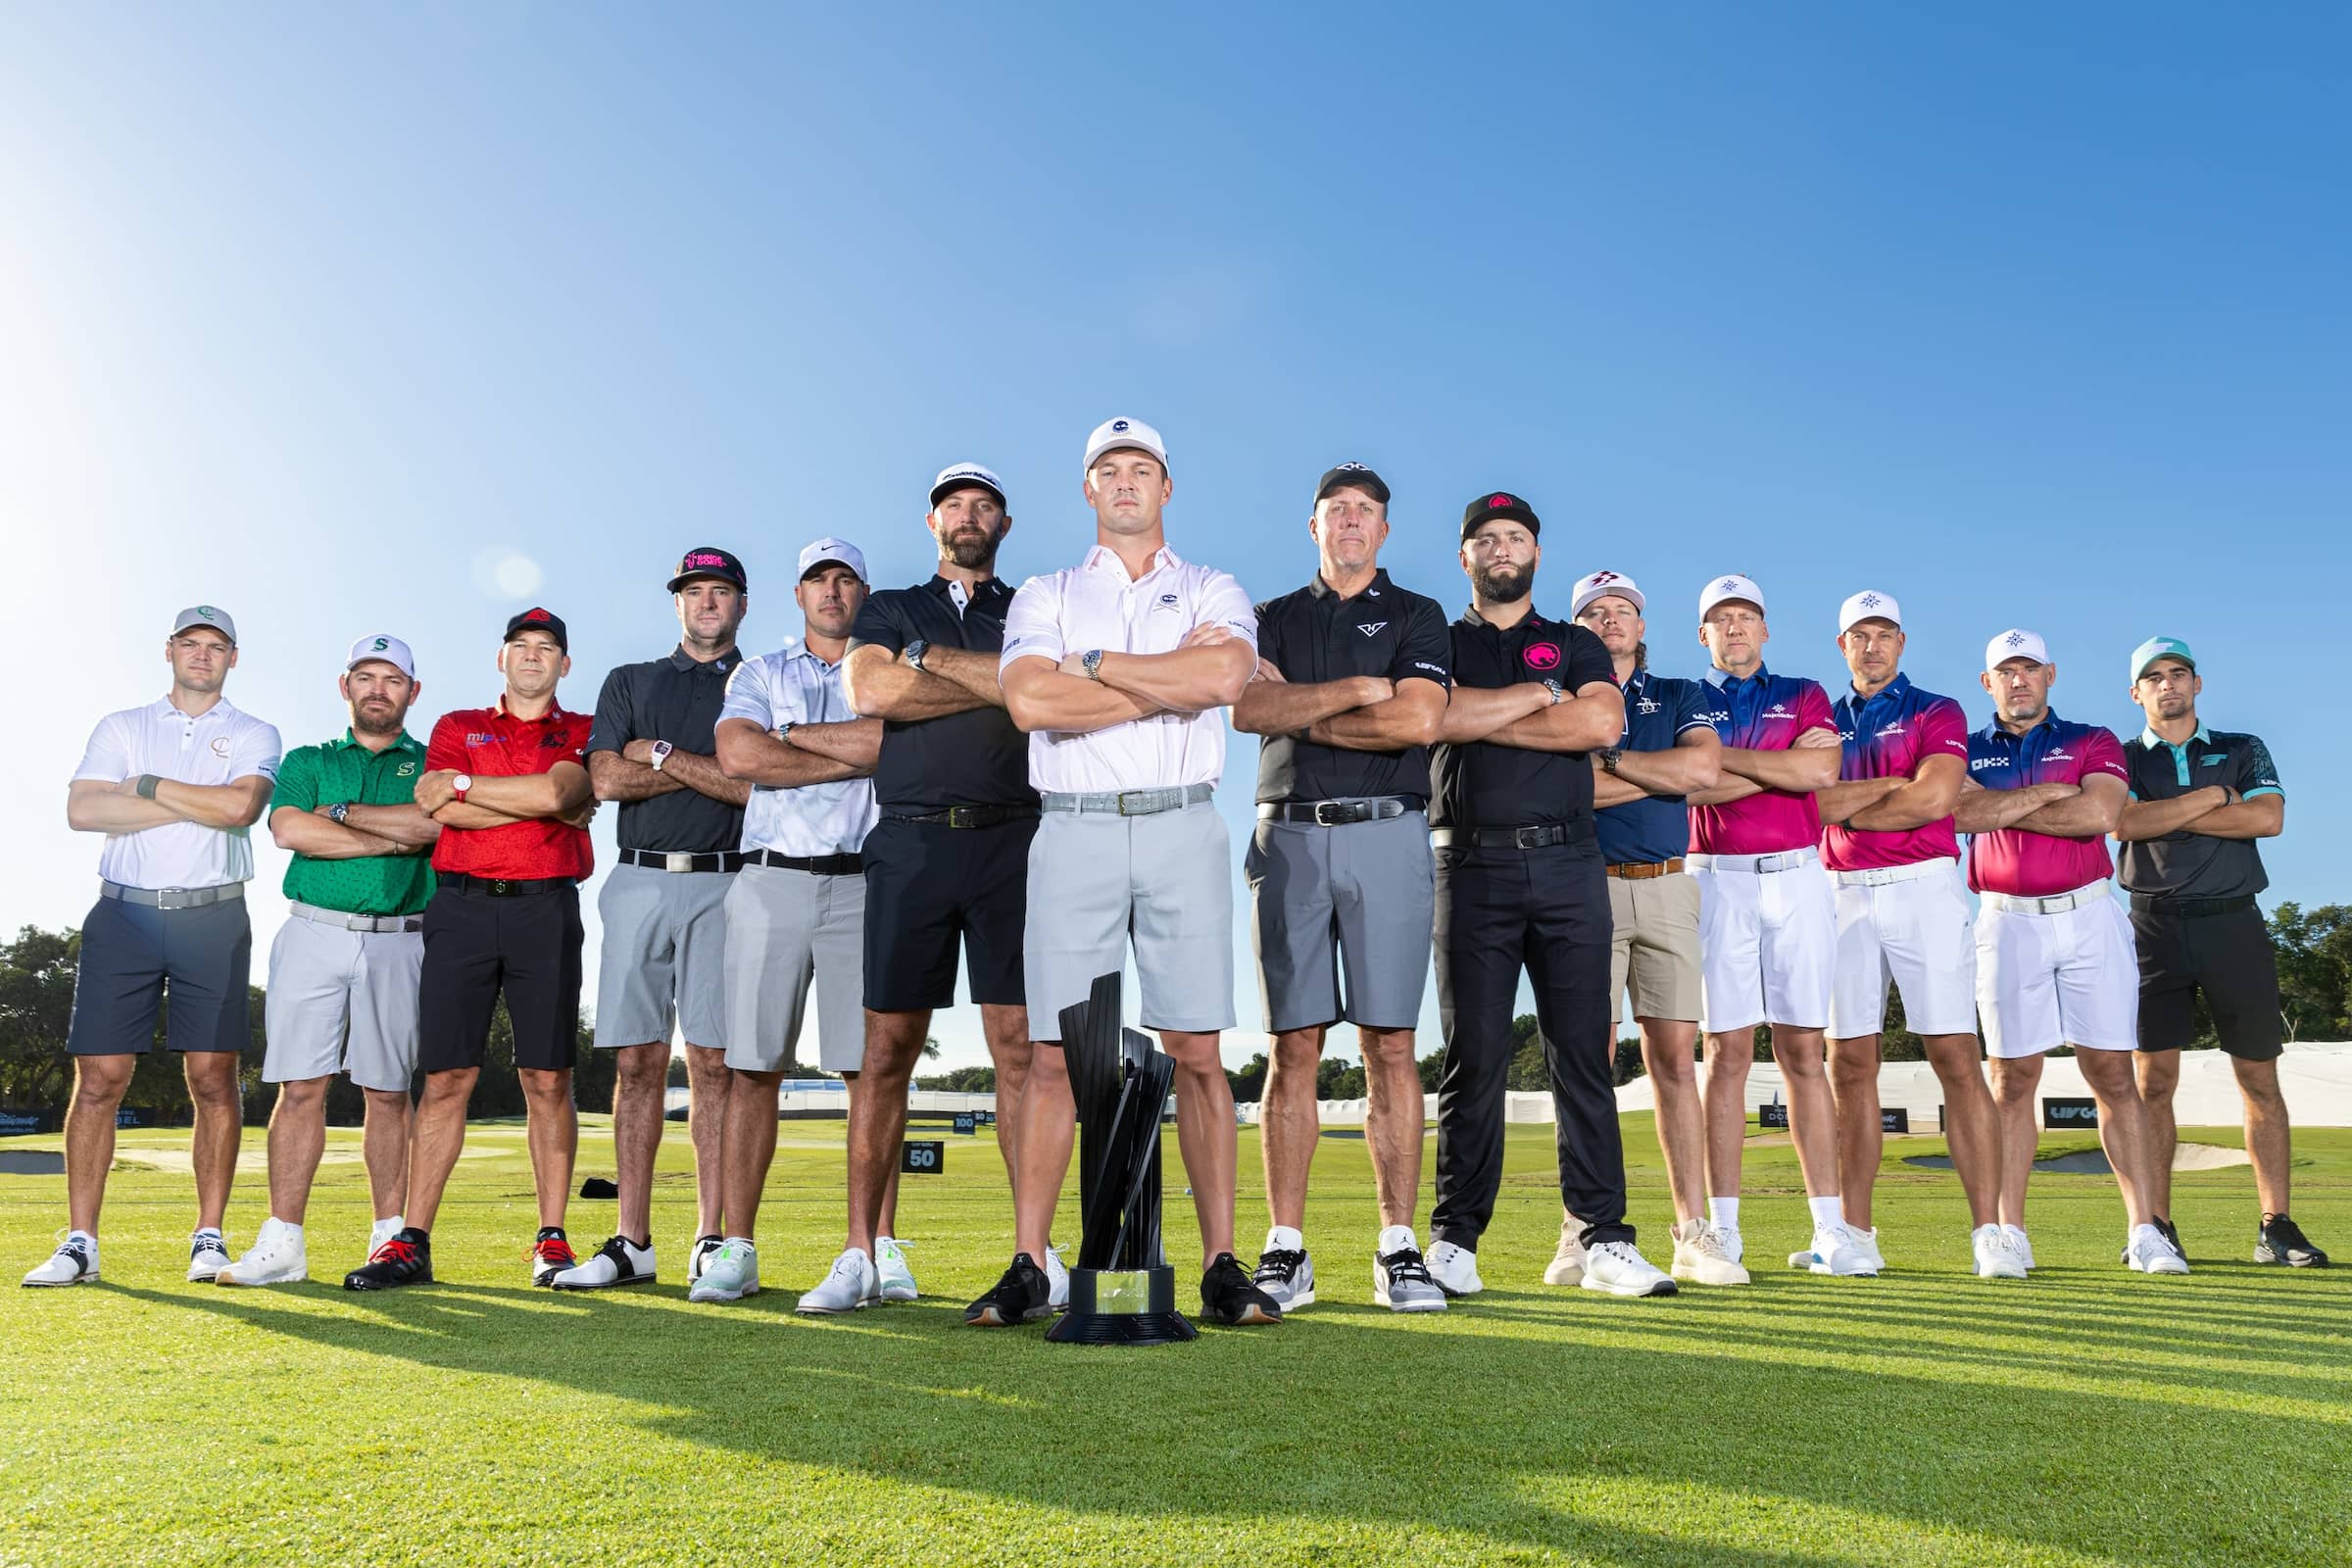 Captain Martin Kaymer of Cleeks GC, Captain Louis Oosthuizen of Stinger GC, Captain Sergio Garcia of Fireballs GC, Captain Bubba Watson of RangeGoats GC, Captain Brooks Koepka of Smash GC, Captain Dustin Johnson of 4Aces GC, Captain Bryson DeChambeau of Crushers GC, Captain Phil Mickelson of HyFlyers GC, Captain Jon Rahm of Legion XIII, Captain Cameron Smith of Ripper GC, Co-Captain Ian Poulter of Majesticks GC, Co-Captain Henrik Stenson of Majesticks GC, Co-Captain Lee Westwood of Majesticks GC and Captain Joaquín Niemann of Torque GC pose for a photo with the Team Trophy during the practice round before of the LIV Golf Mayakoba at the El CamaleÛn Golf Course in Playa del Carmen, Mexico.